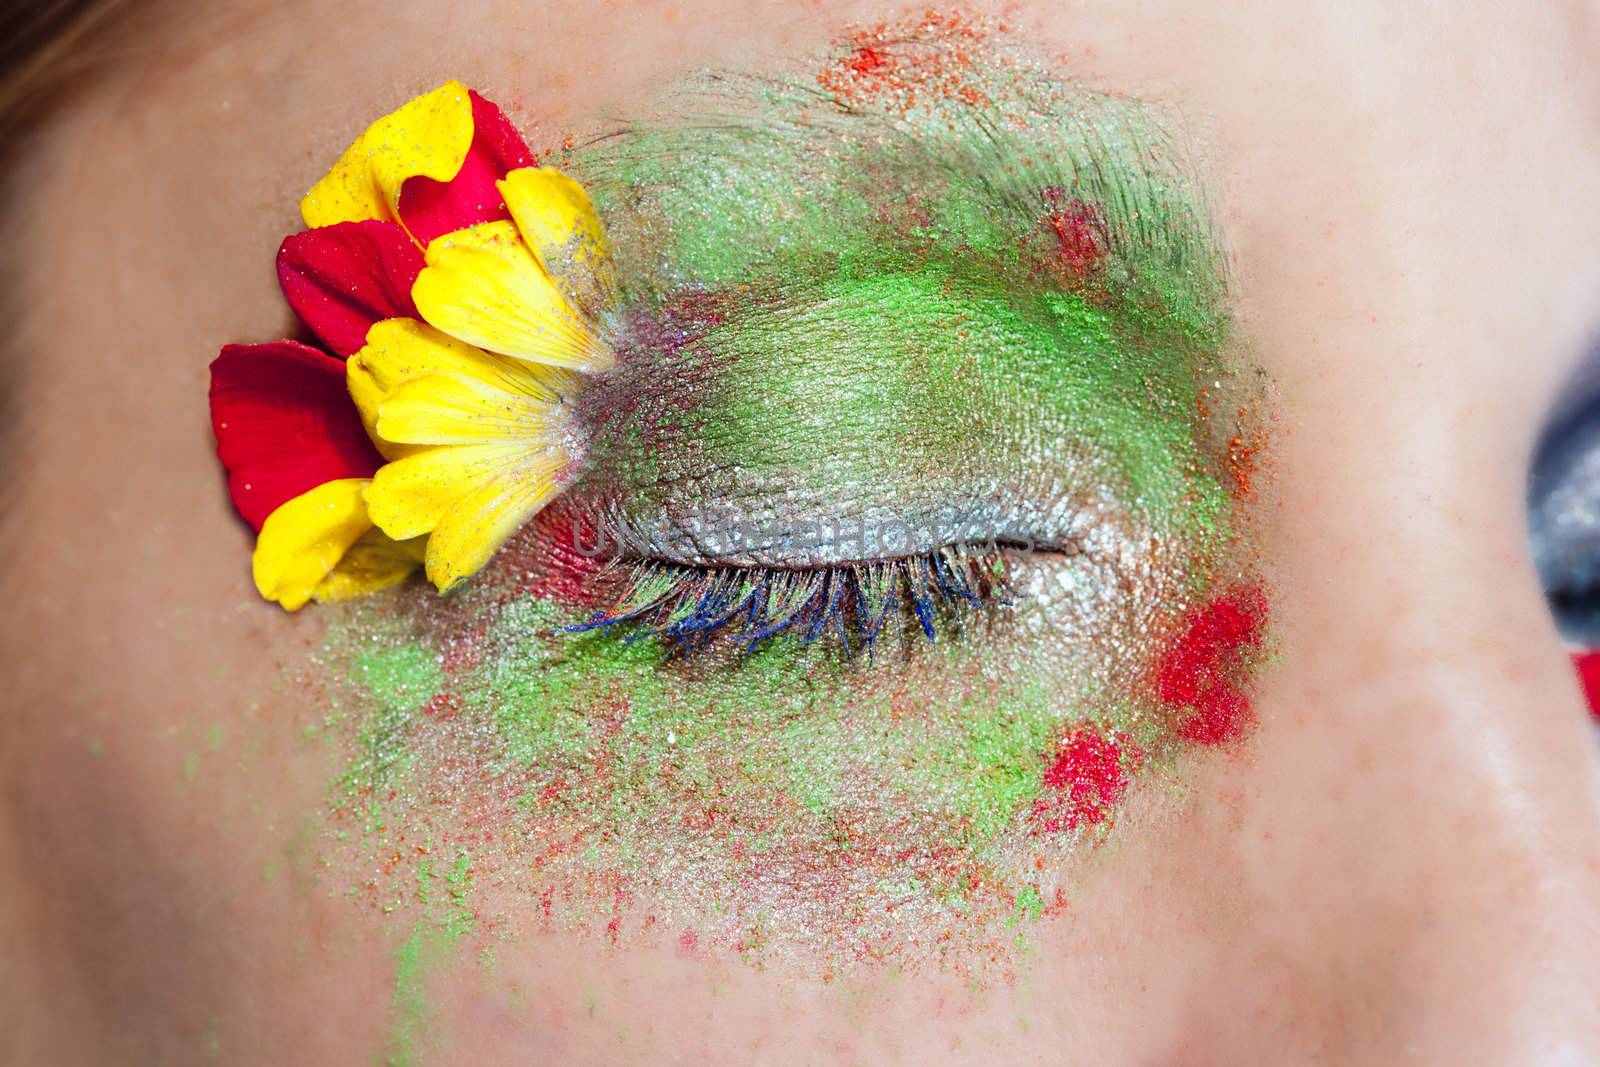 closed woman eye makeup inspired in spring with flowers meadow and yellow petals